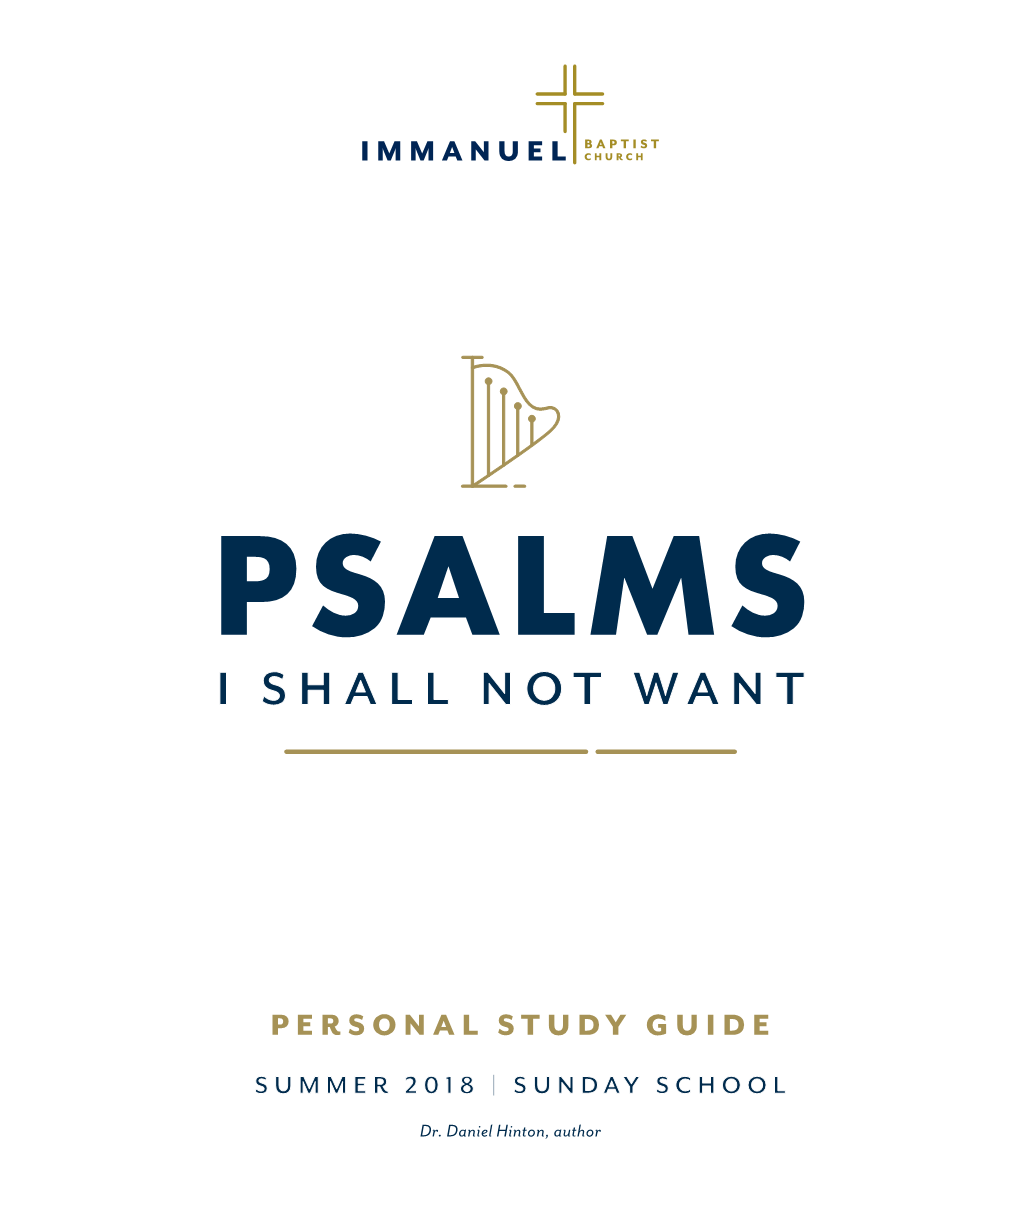 PSALMS Personal Study Guide | Summer 2018 HISTORICAL CONTEXT REFERENCE GUIDE